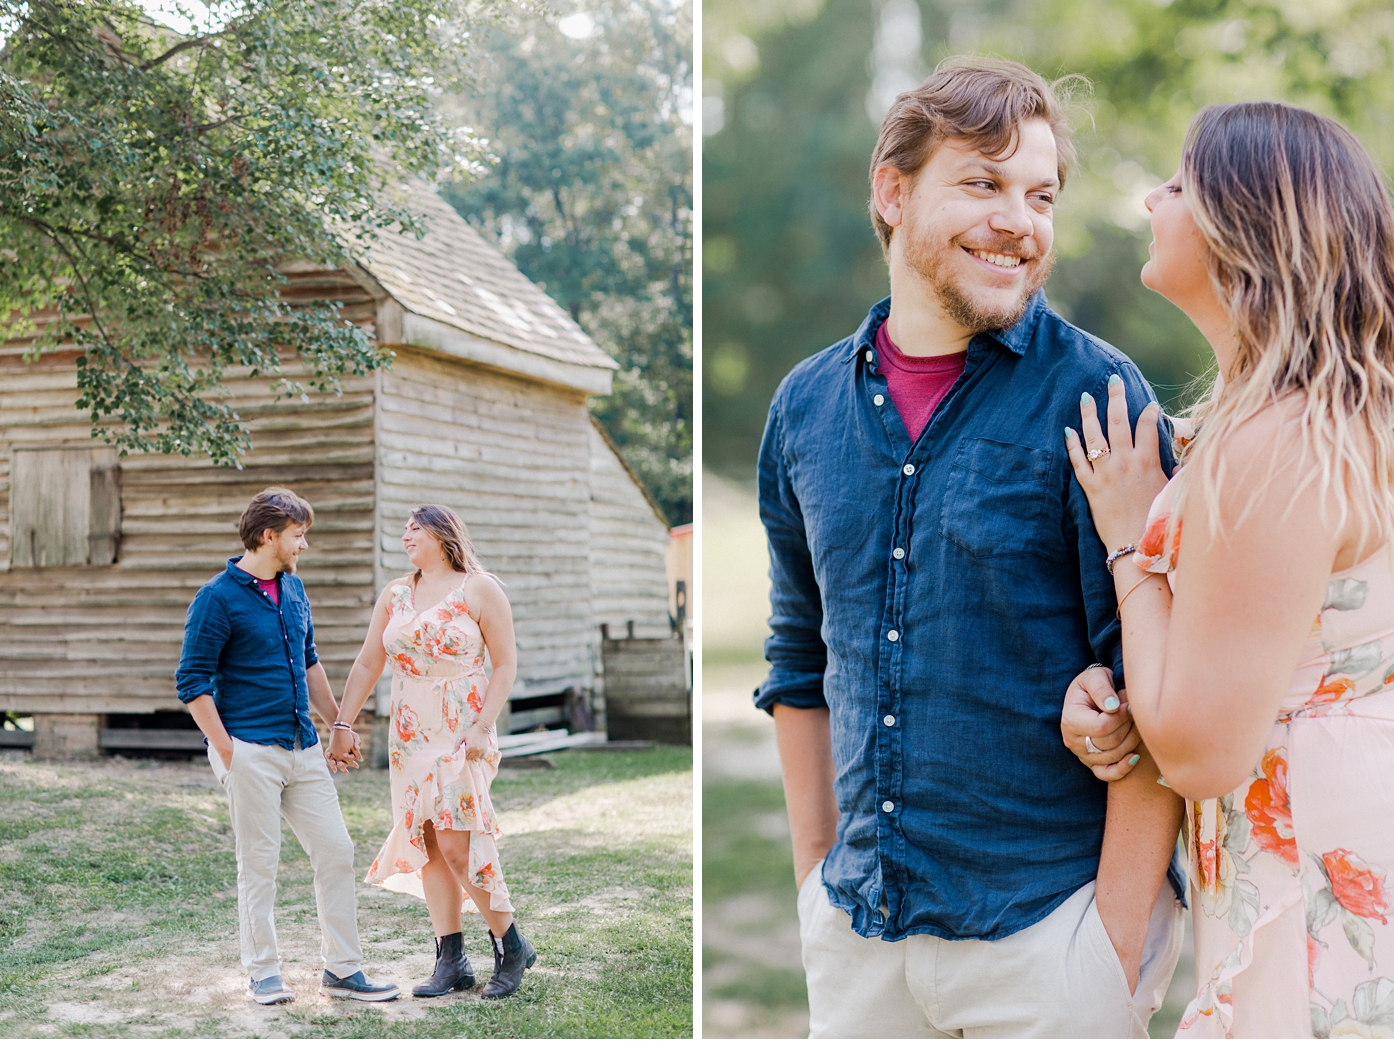 Meadows Farm Crump Park Engagement Session by Alisandra Photography